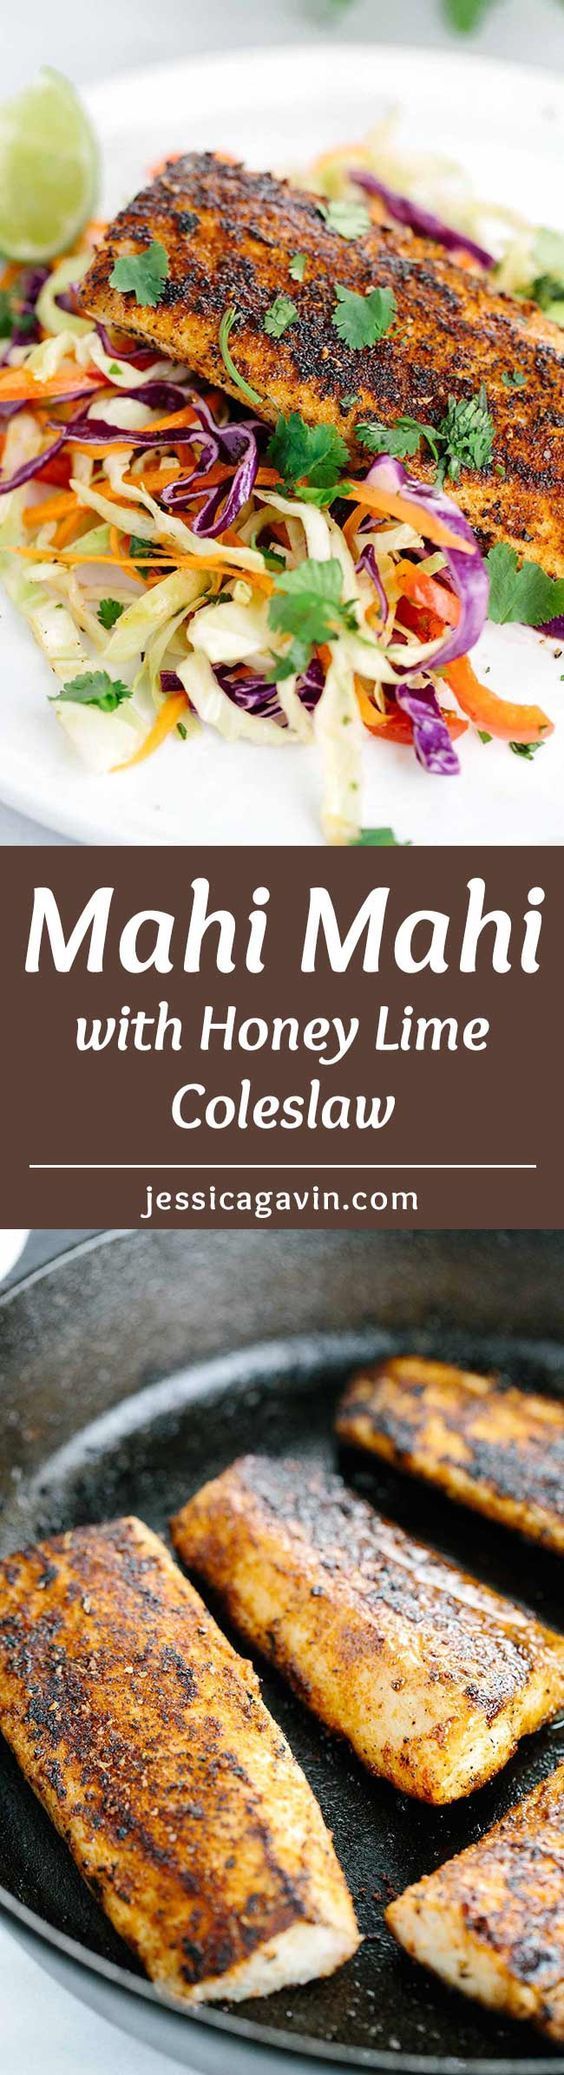 Pan Seared Mahi Mahi with Honey Lime Coleslaw – The fish in this recipe are coated with a blend of savory and sweet spices and